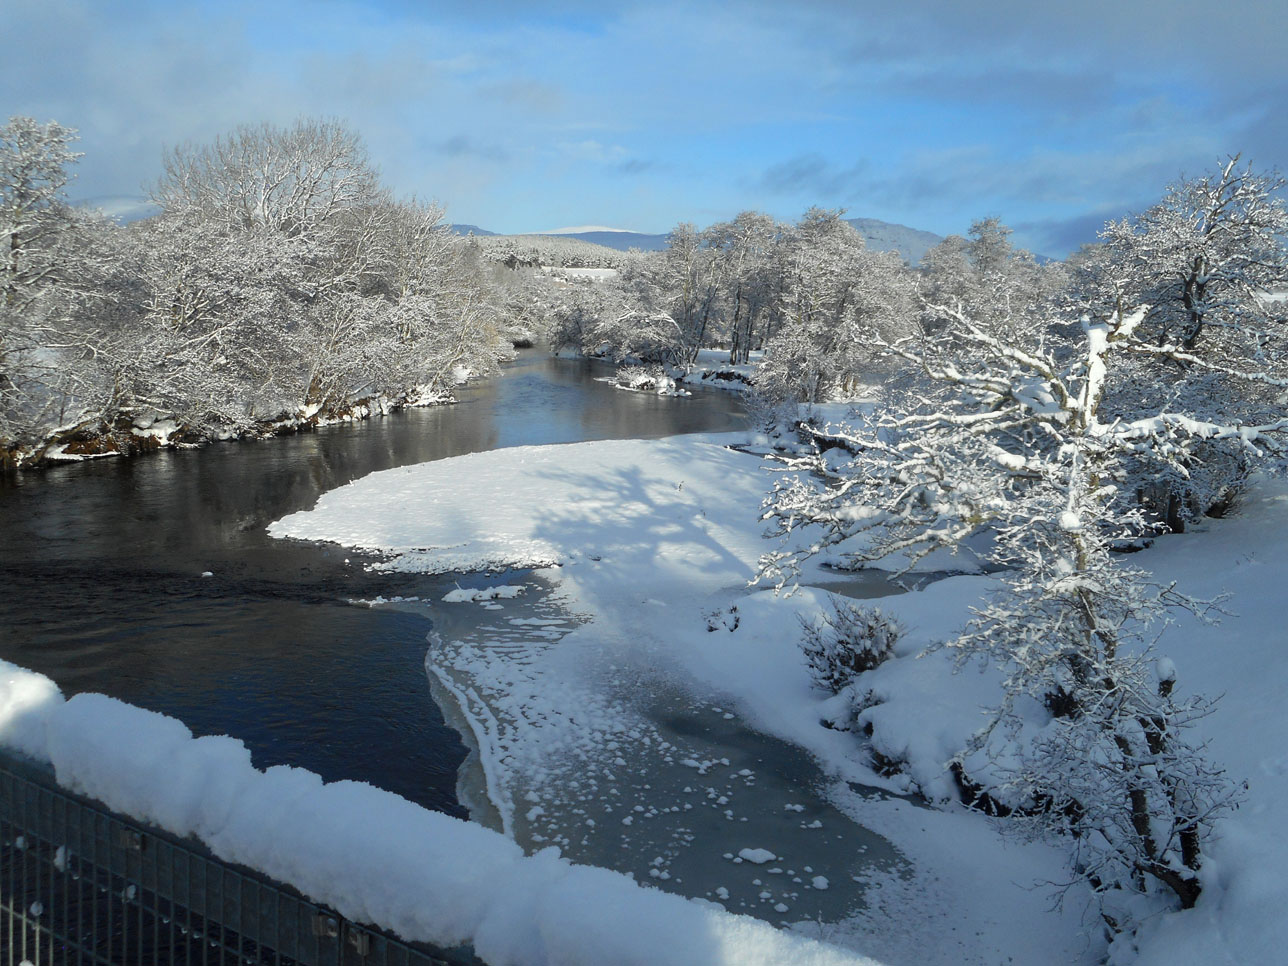 10 The River Spey from the Kingussie Bridge